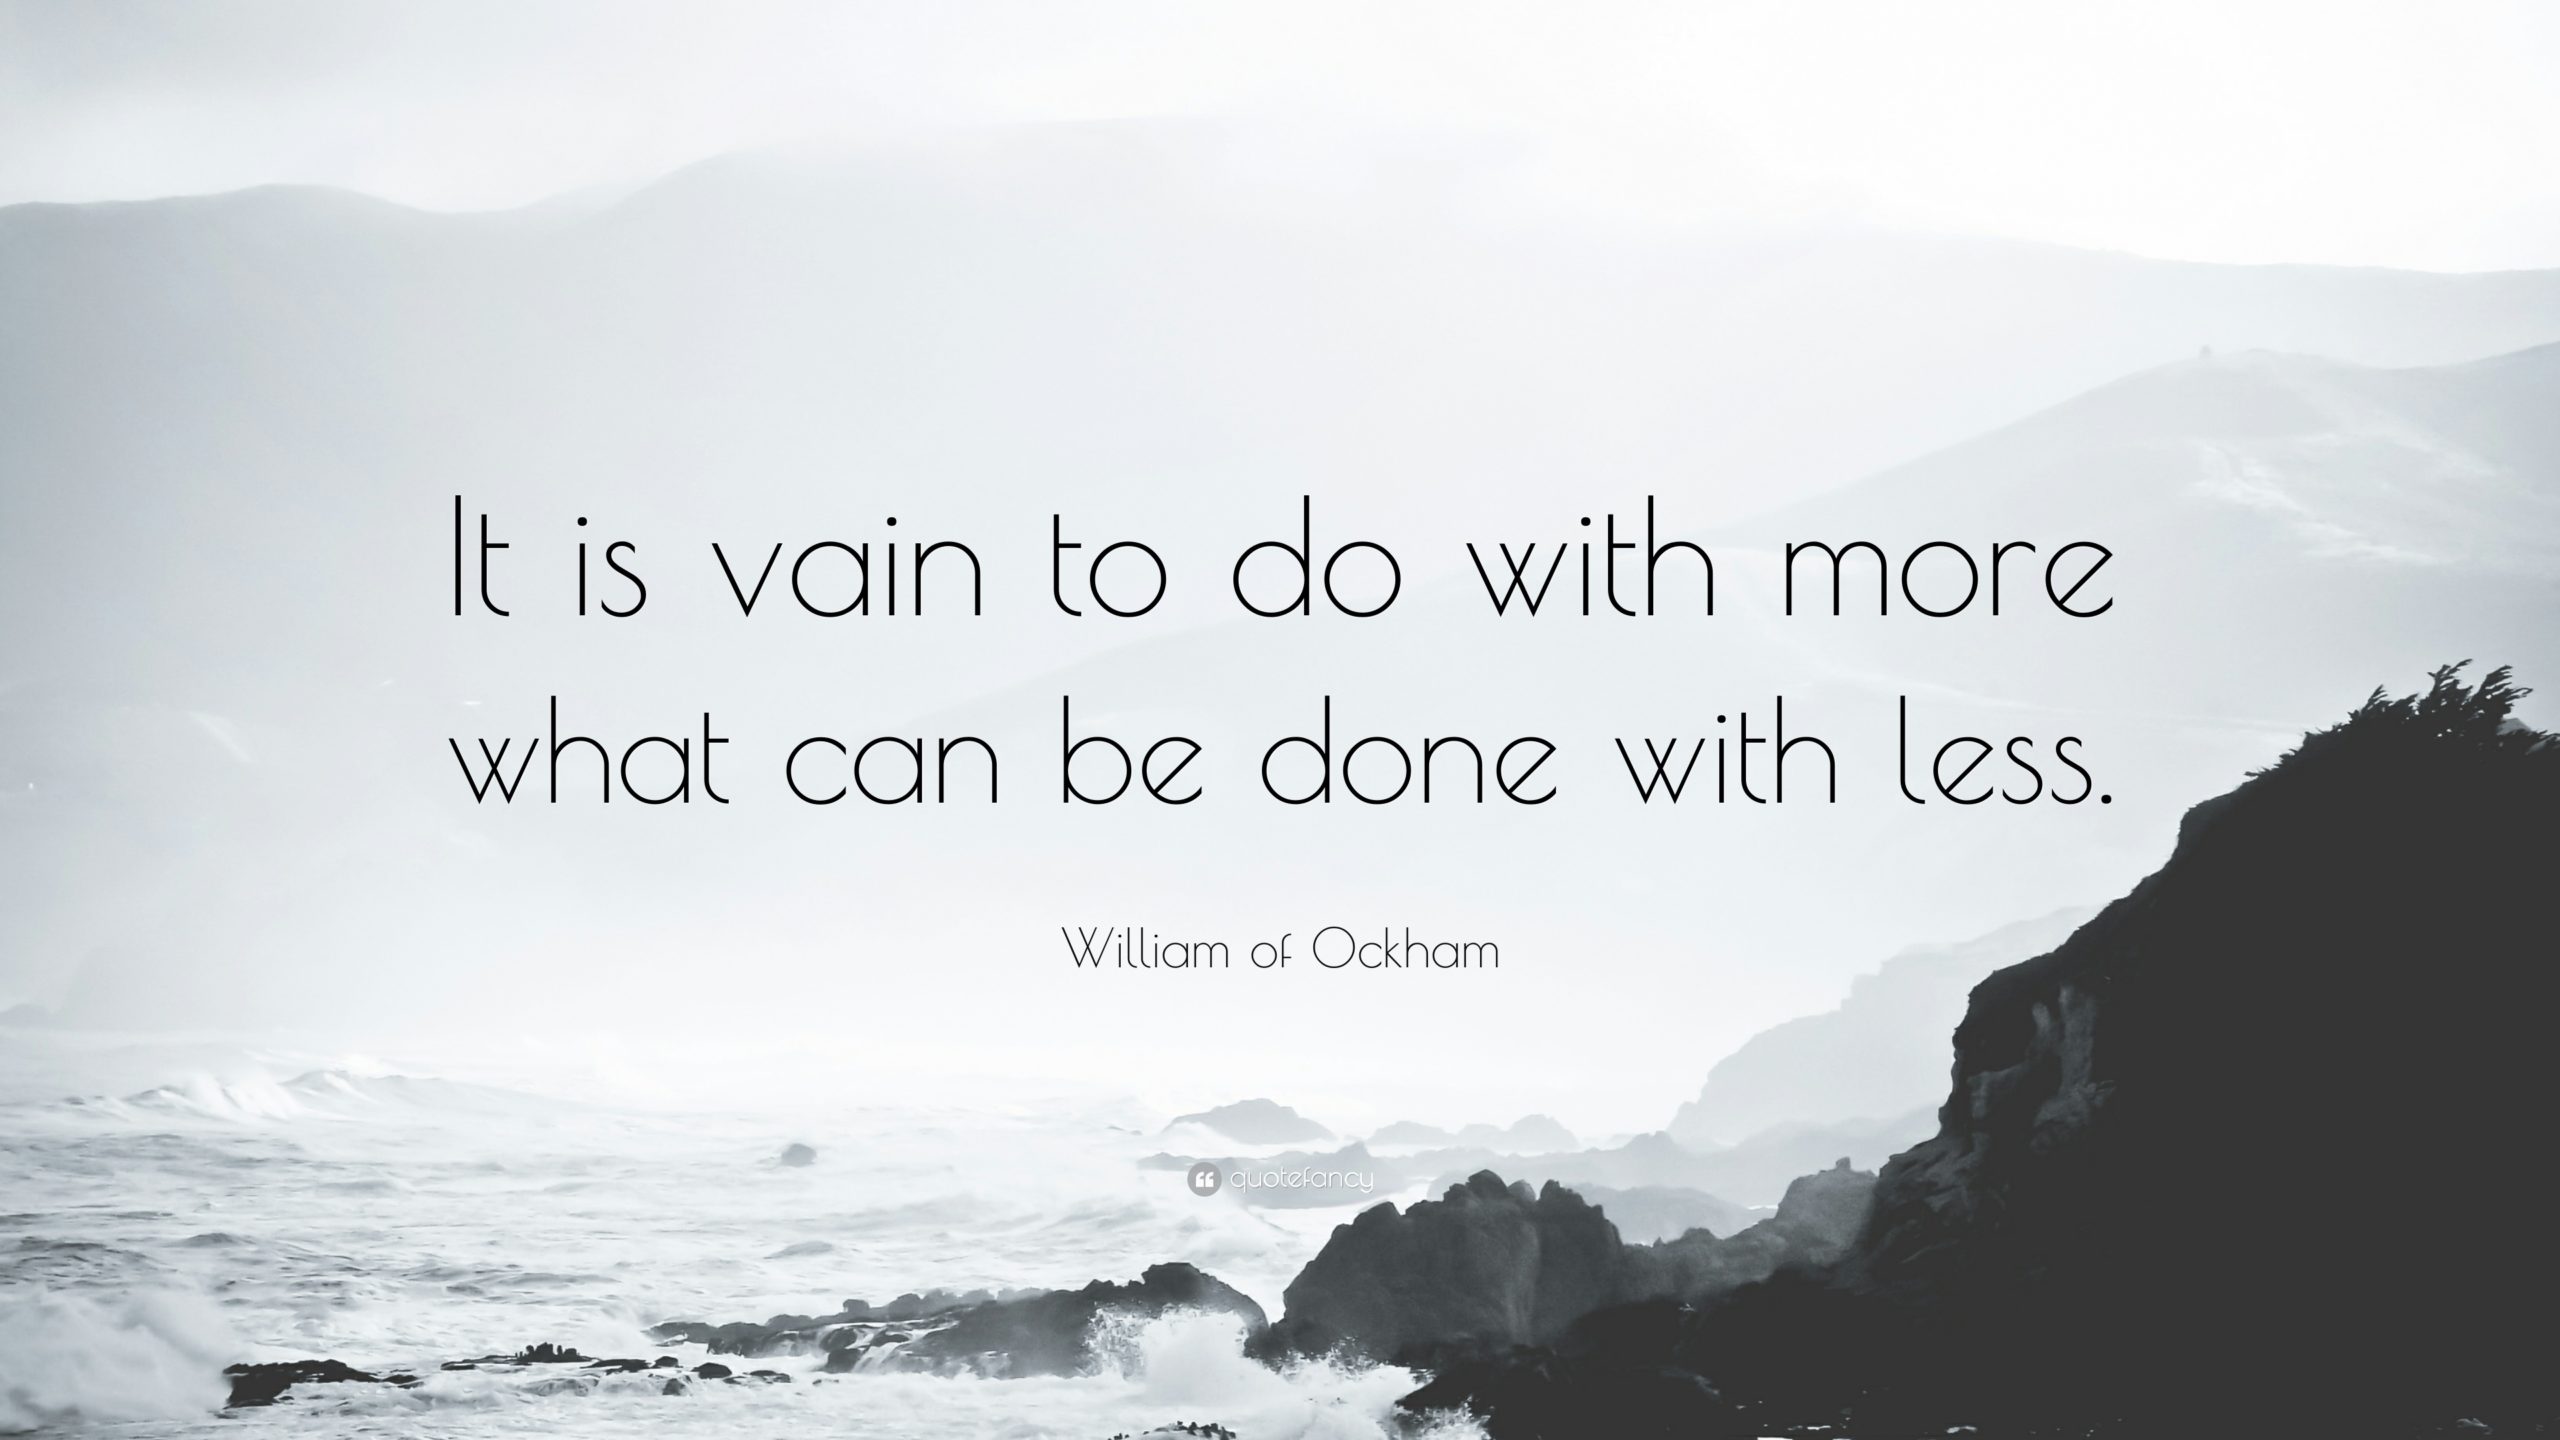 It is vain to do with more what can be done with less